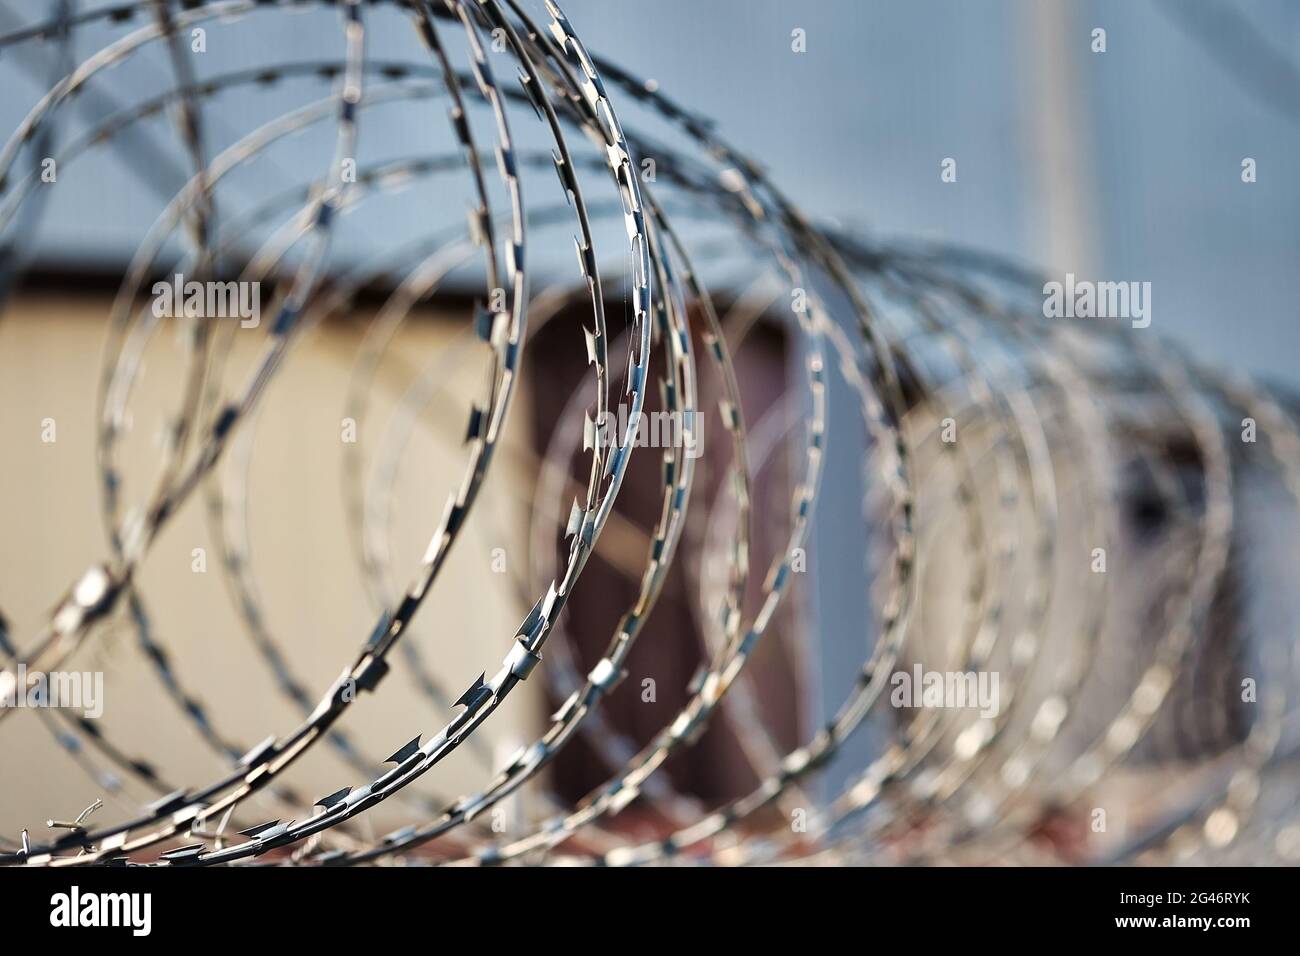 Spirals of barbed wire on a concrete fence. A symbol of incarceration and lack of freedom. Stock Photo